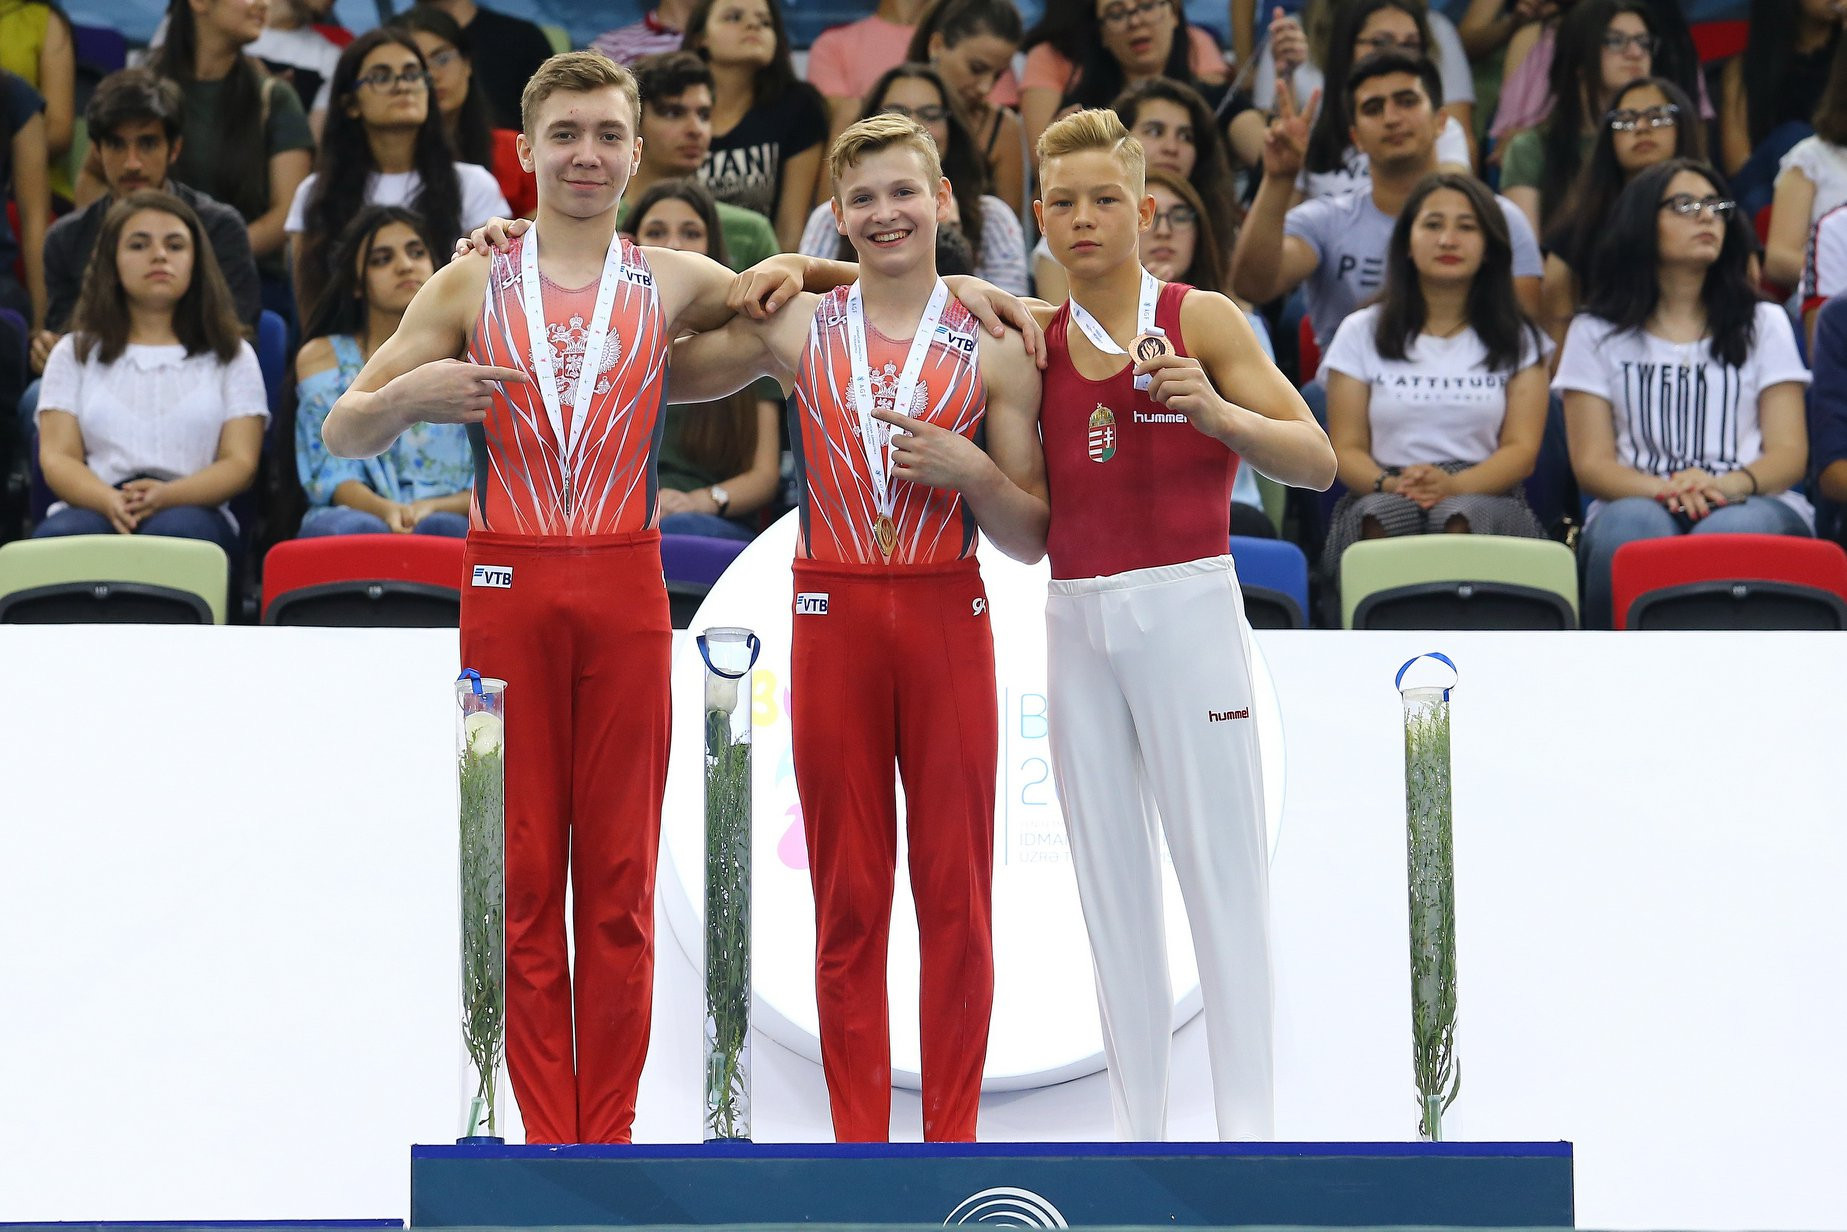 Russia's Iurii Busse, centre, came out on top in the boys' event ©FIG